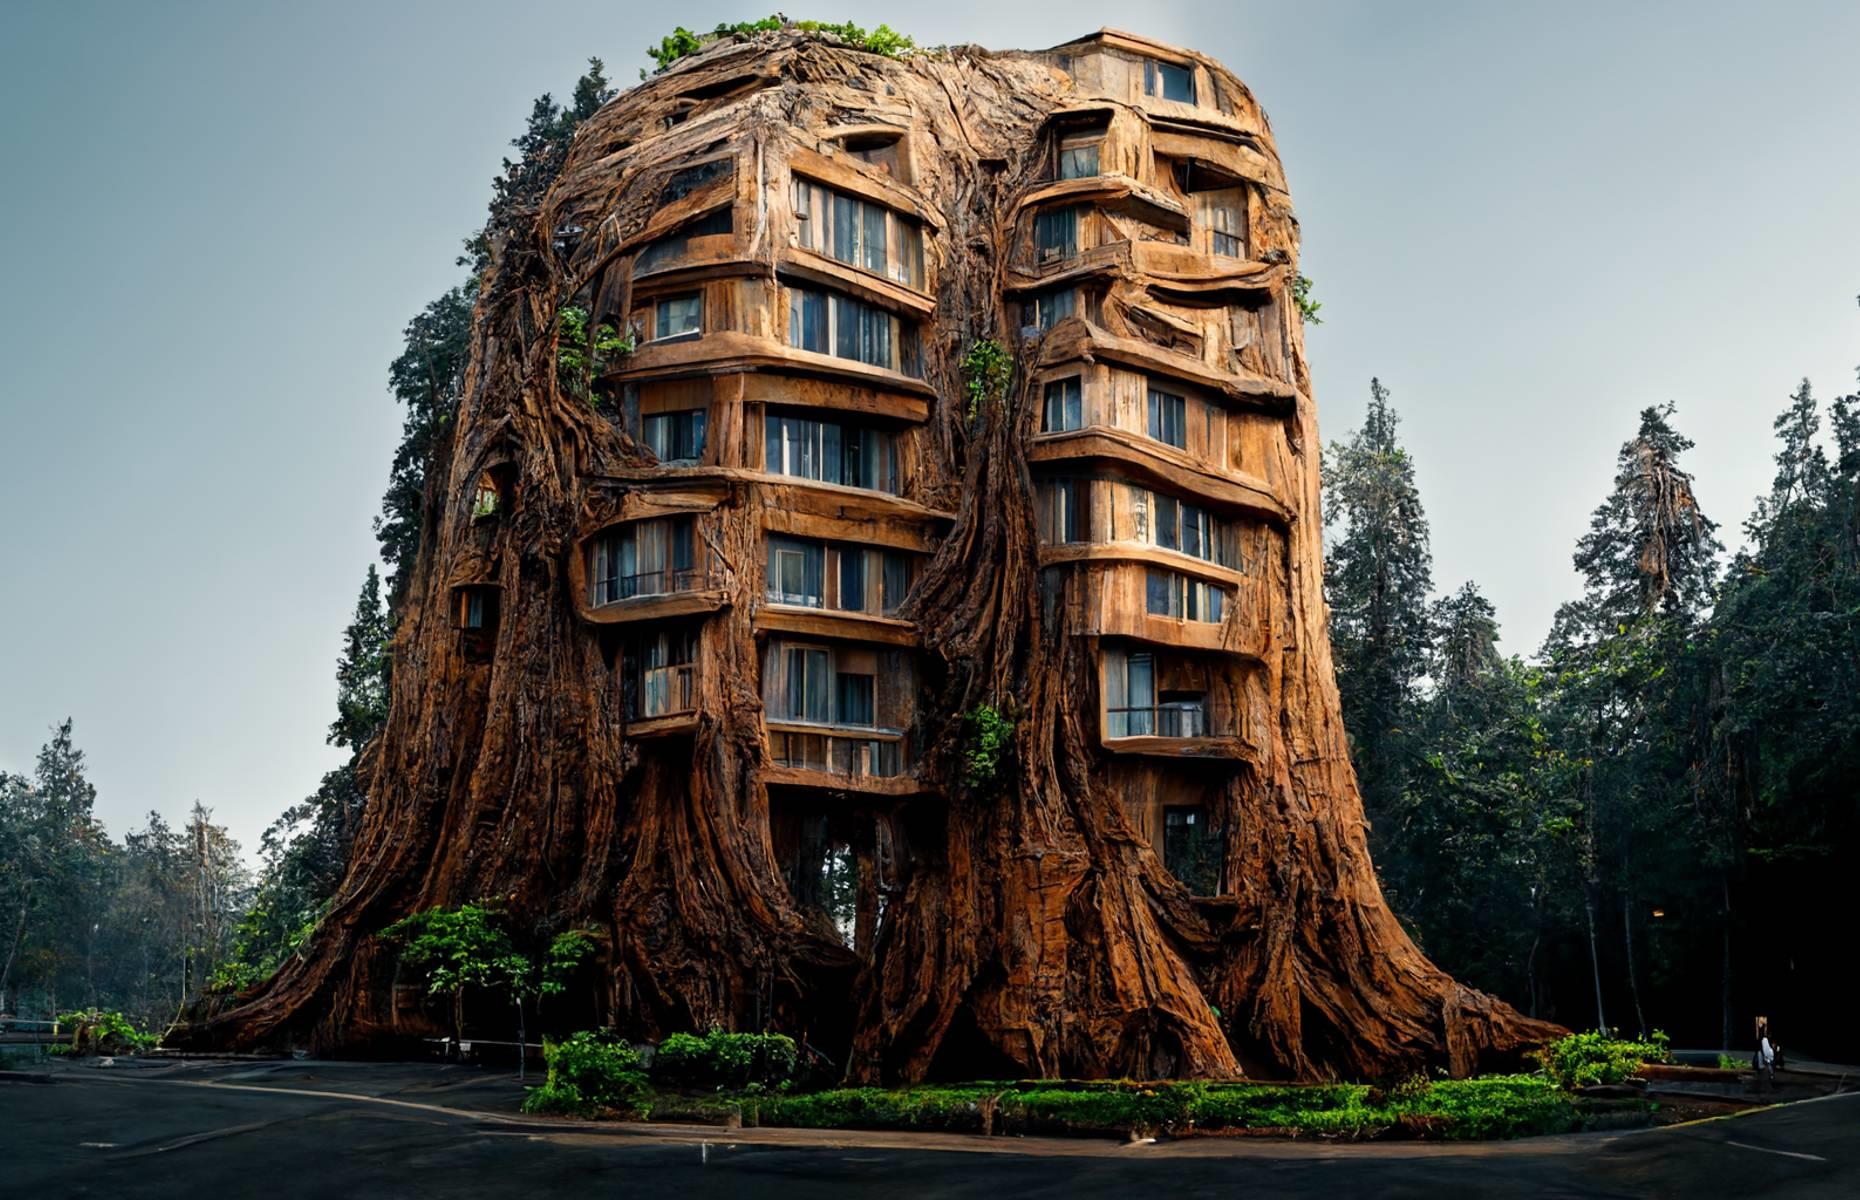 Presenting a bold new vision for what the structures of the future could look like, Indian architect Manas Bhatia has designed a number of nature-inspired buildings using the artificial intelligence (AI) tool Midjourney. He inputted text descriptions including “giant”, ”hollowed”, ”tree”, ”stairs”, ”facade” and ”plants” into the software to create these digital images, which envision giant apartment blocks inside hollowed-out redwood trees.